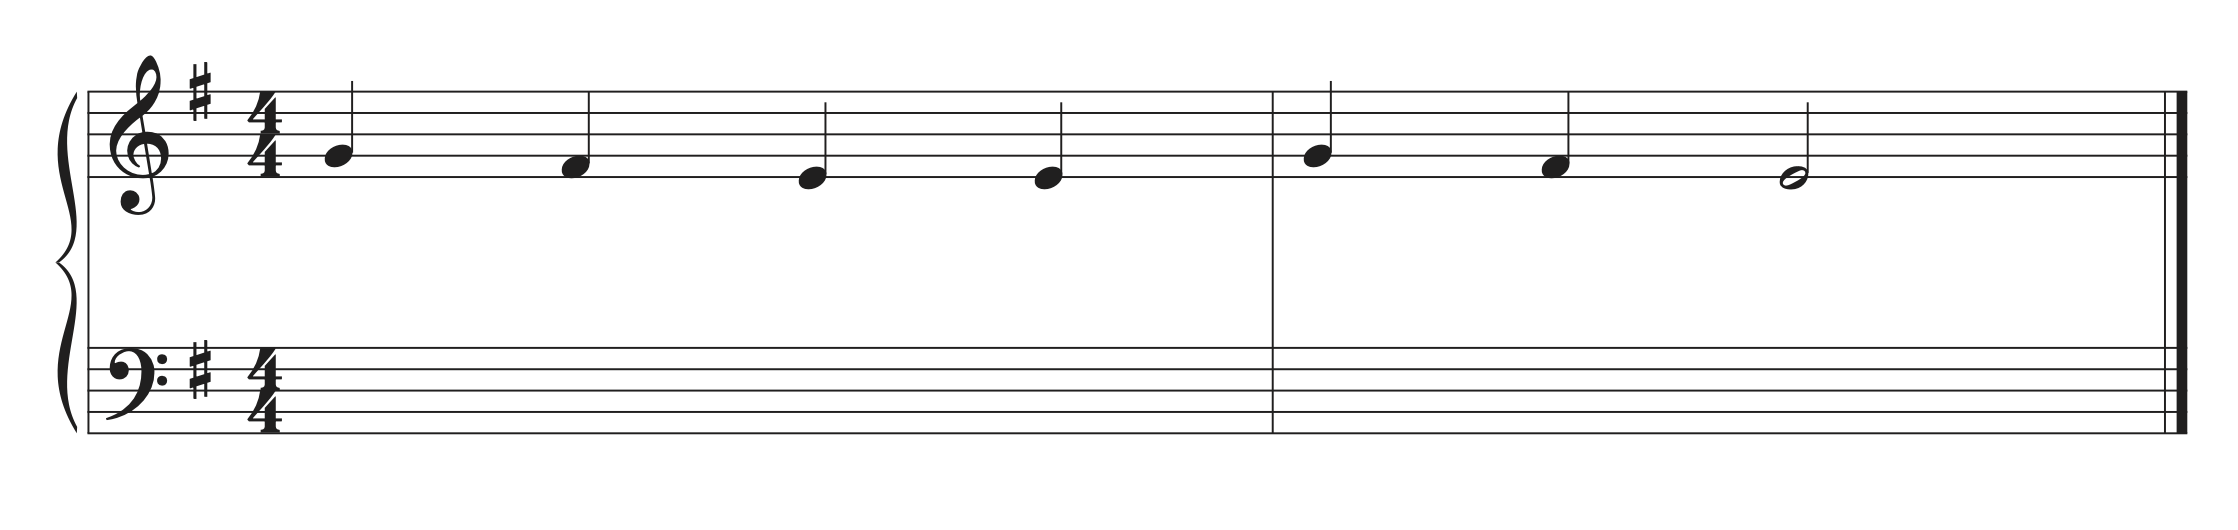 A two-bar musical example in G major with notes F4, F-sharp 4, E4, E4, G4, F-sharp 4, E4.